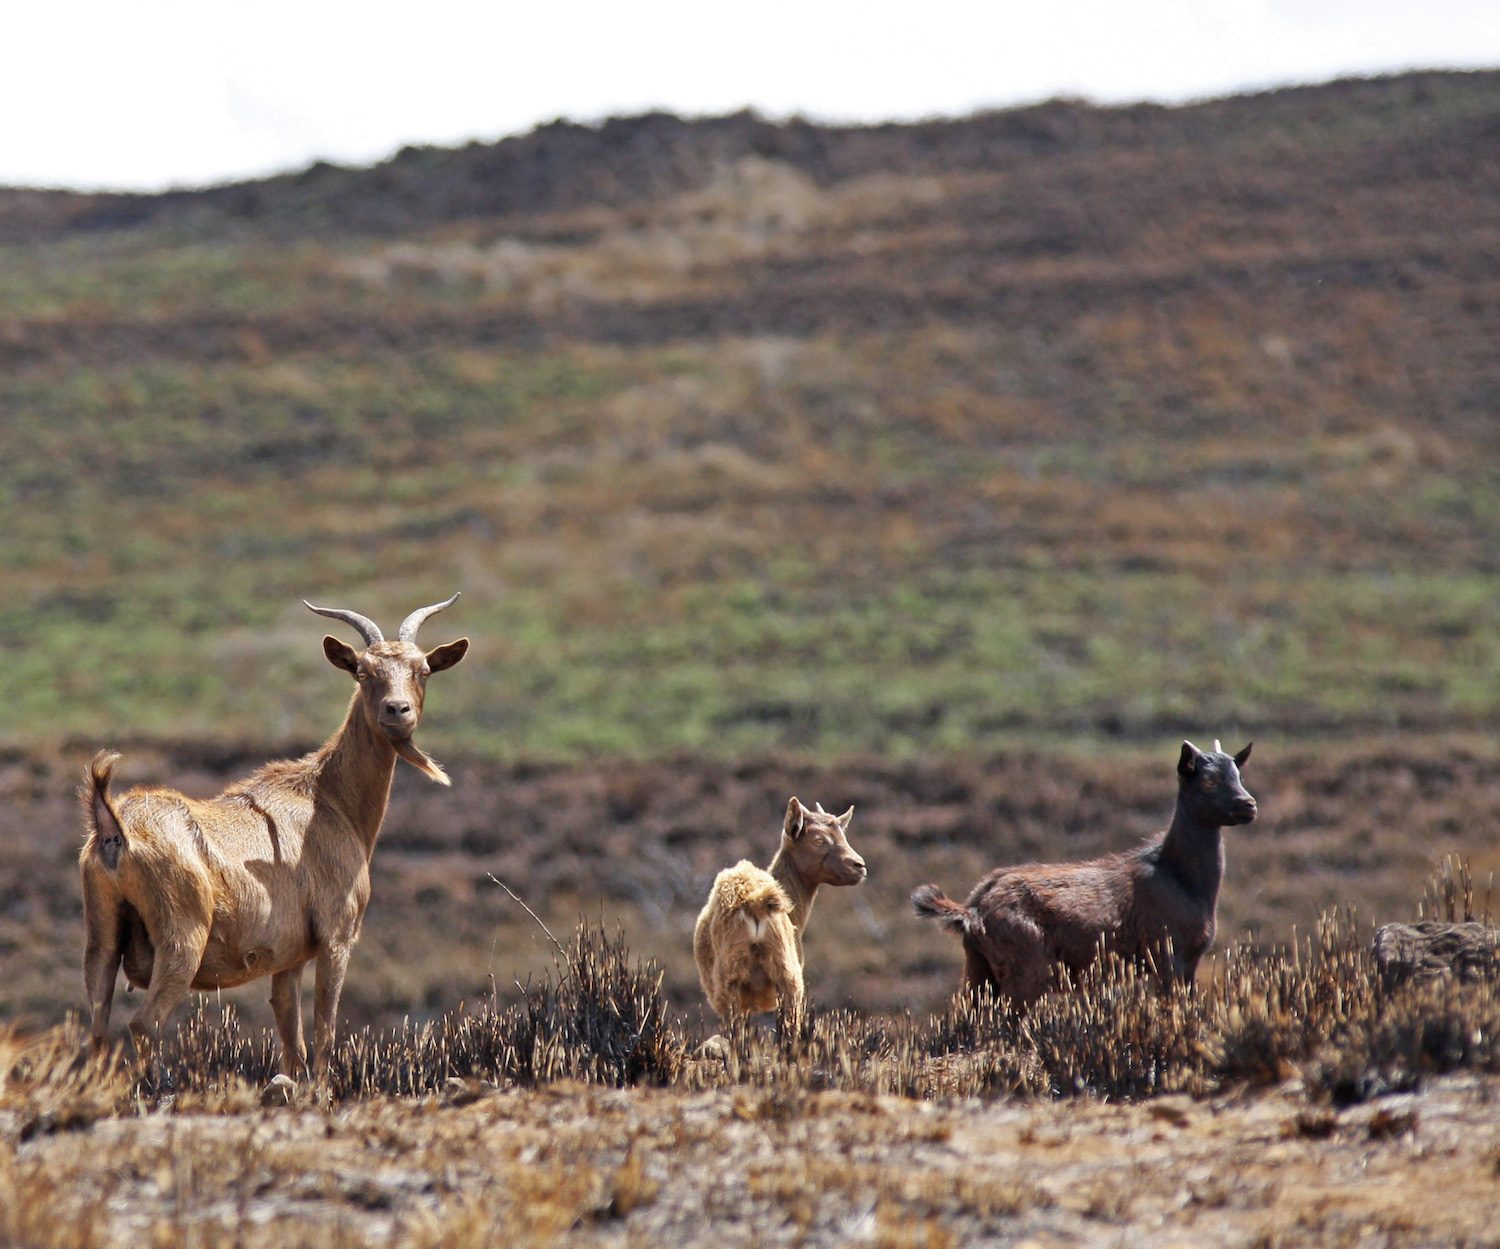 Wild goats forage for vegetation at a pasture scorched by the July 31th brush fire next to Waikoloa Villiage.